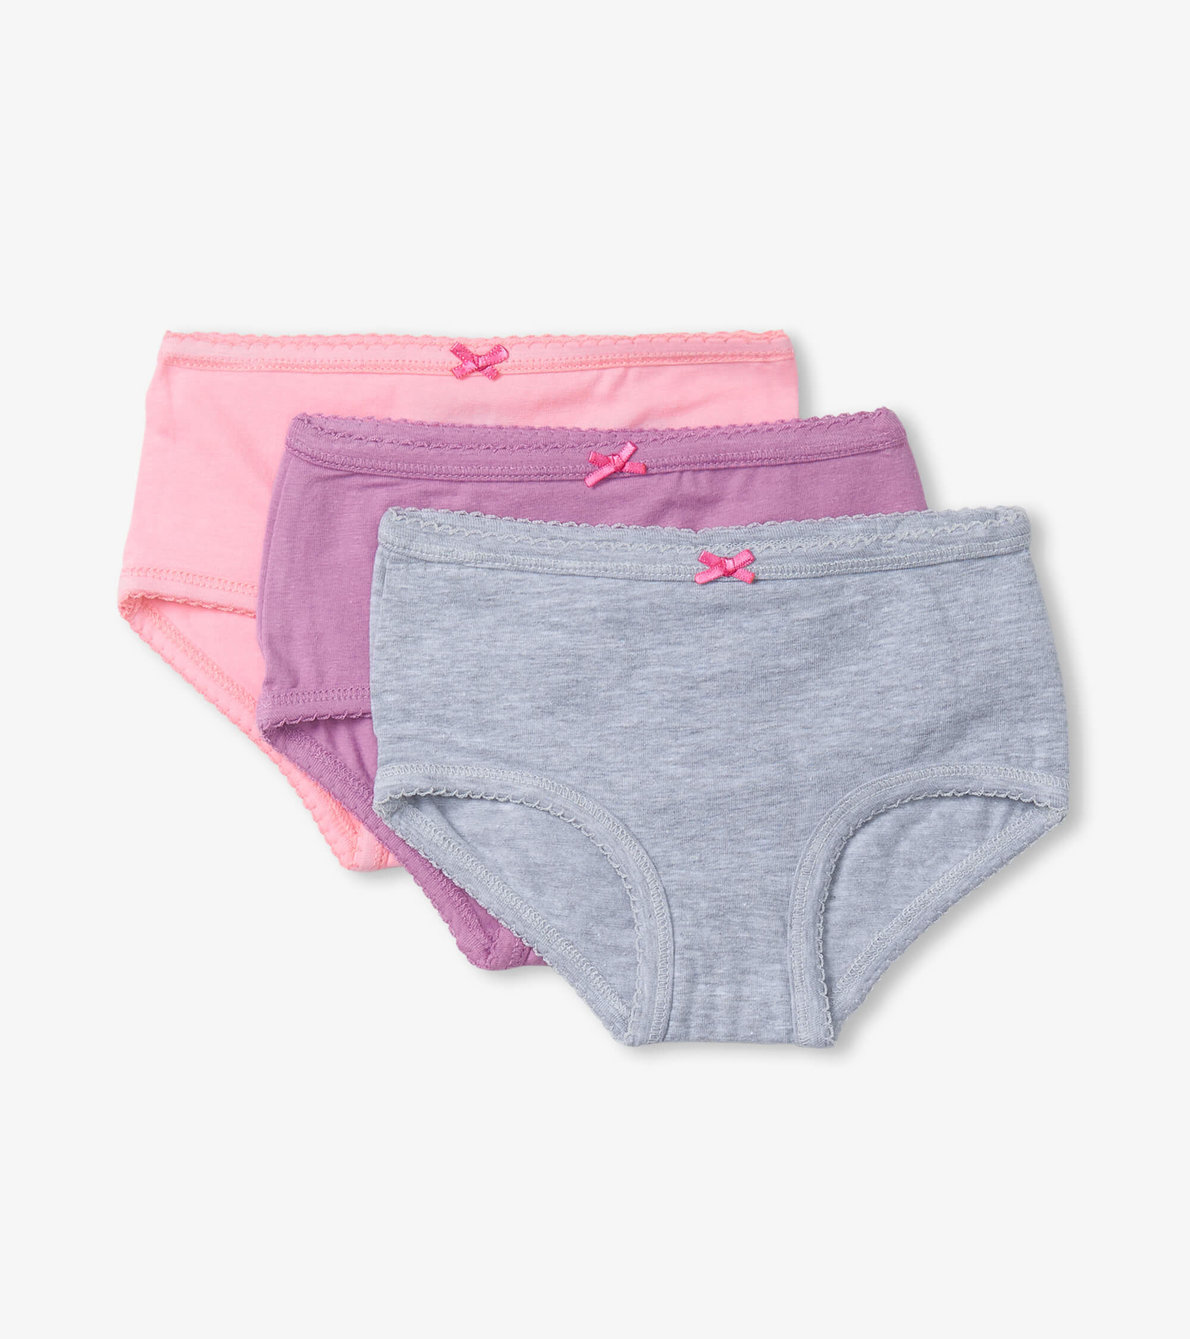 View larger image of Classic Solids Girls Hipster Underwear 3 Pack